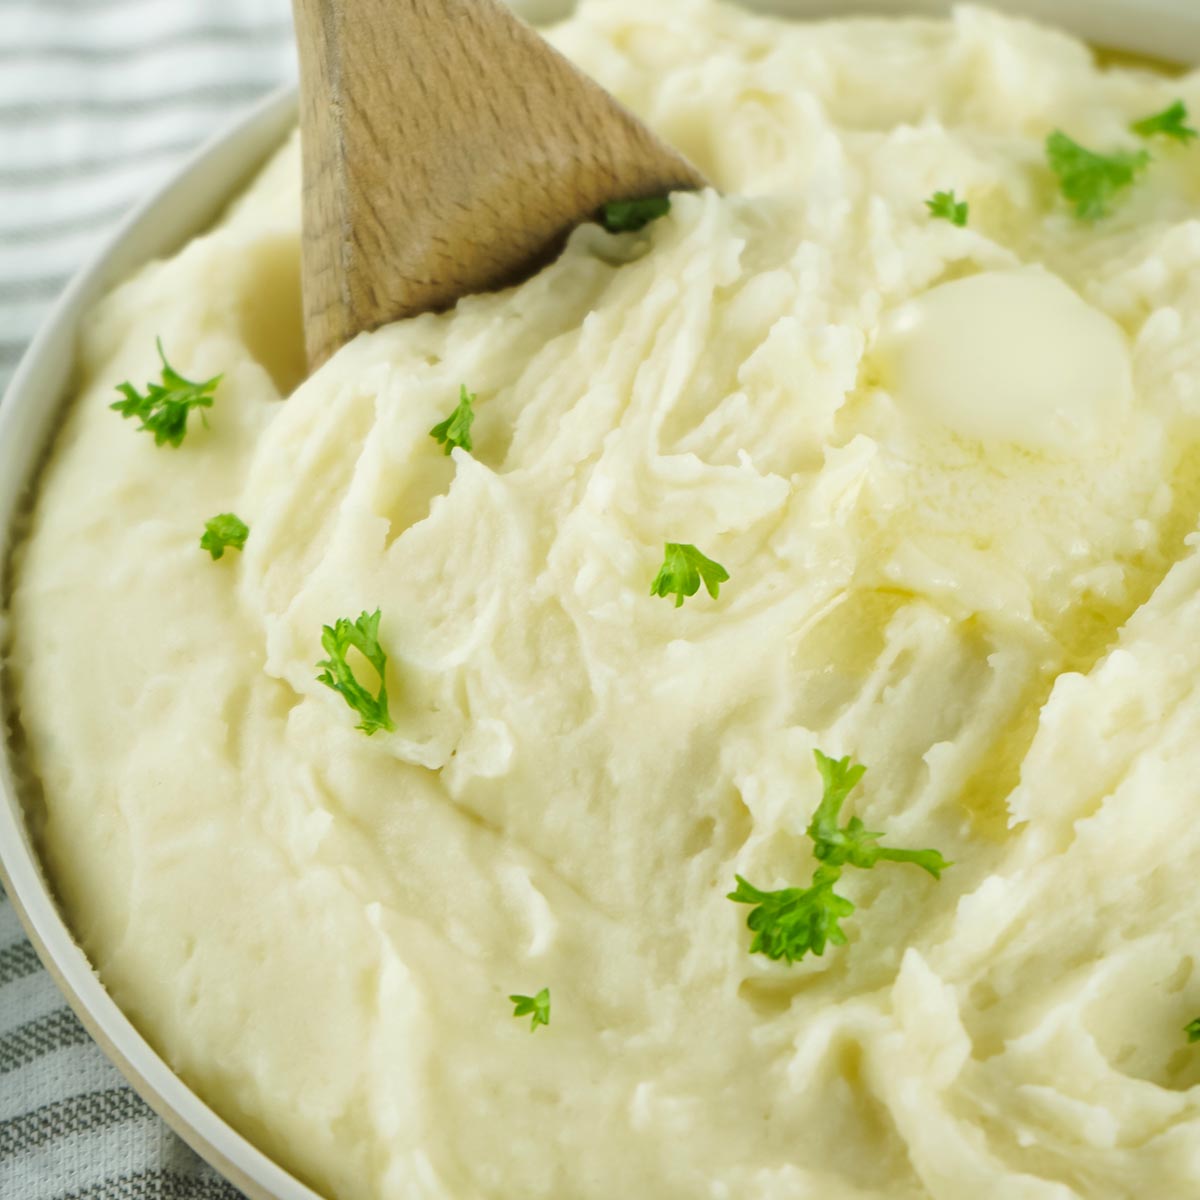 a serving bowl of completed mashed potatoes with a wooden spoon lifting some out